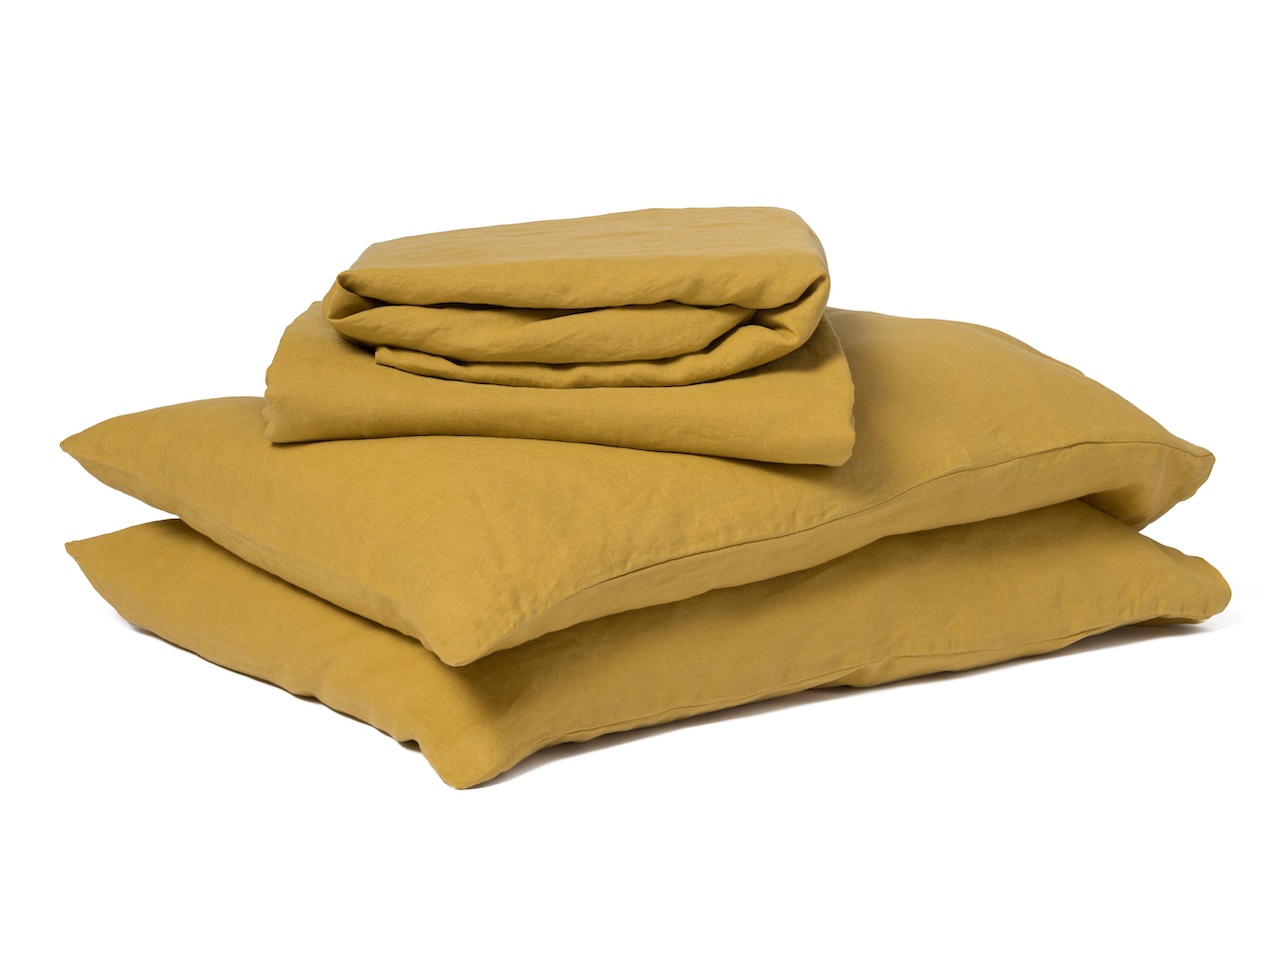 A set of Wilet linen sheets, part of the best Black Friday deals.